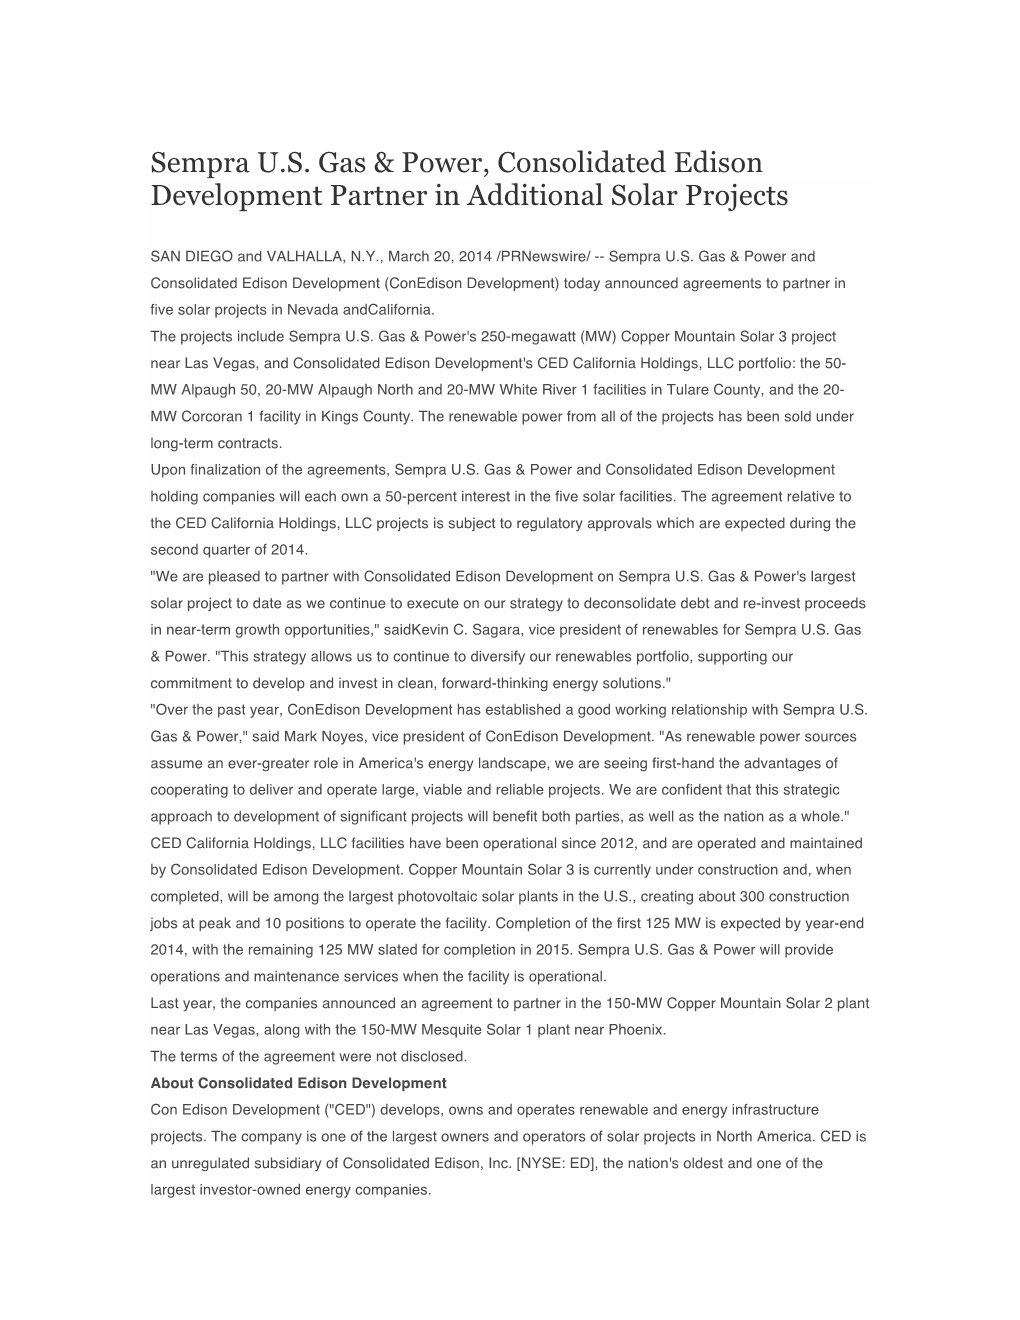 Sempra U.S. Gas & Power, Consolidated Edison Development Partner in Additional Solar Projects